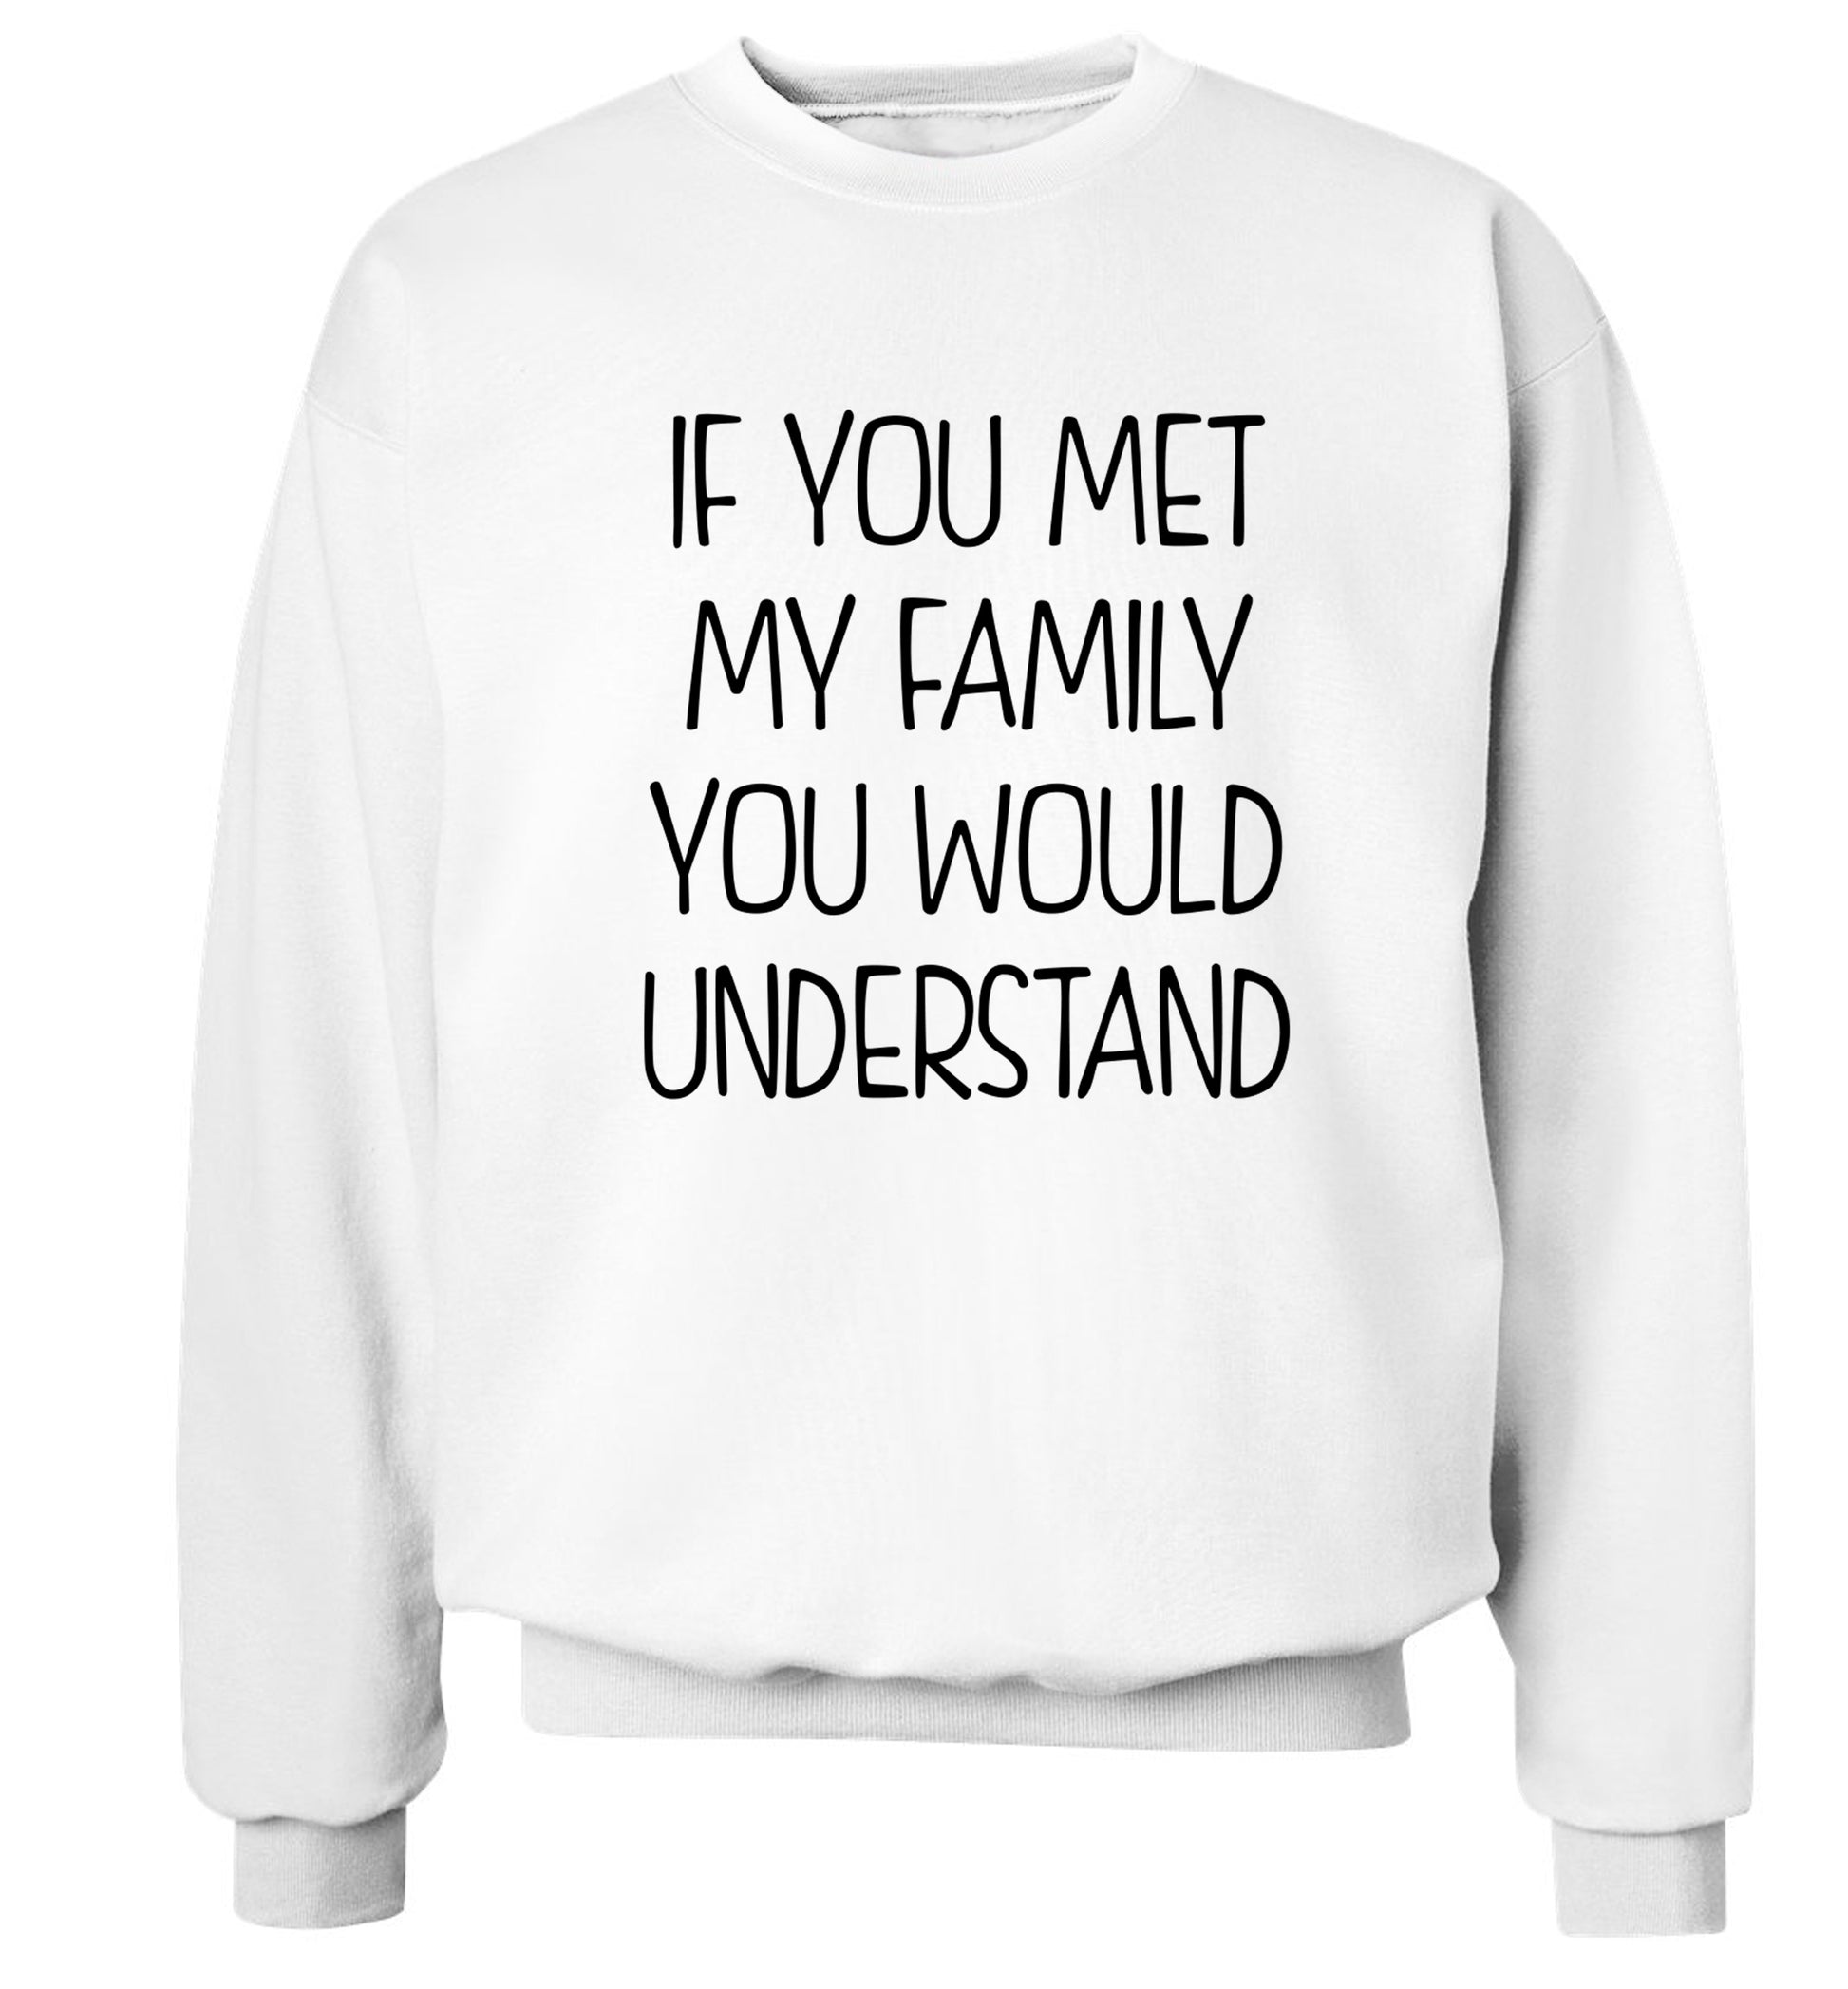 If you met my family you would understand Adult's unisex white Sweater 2XL